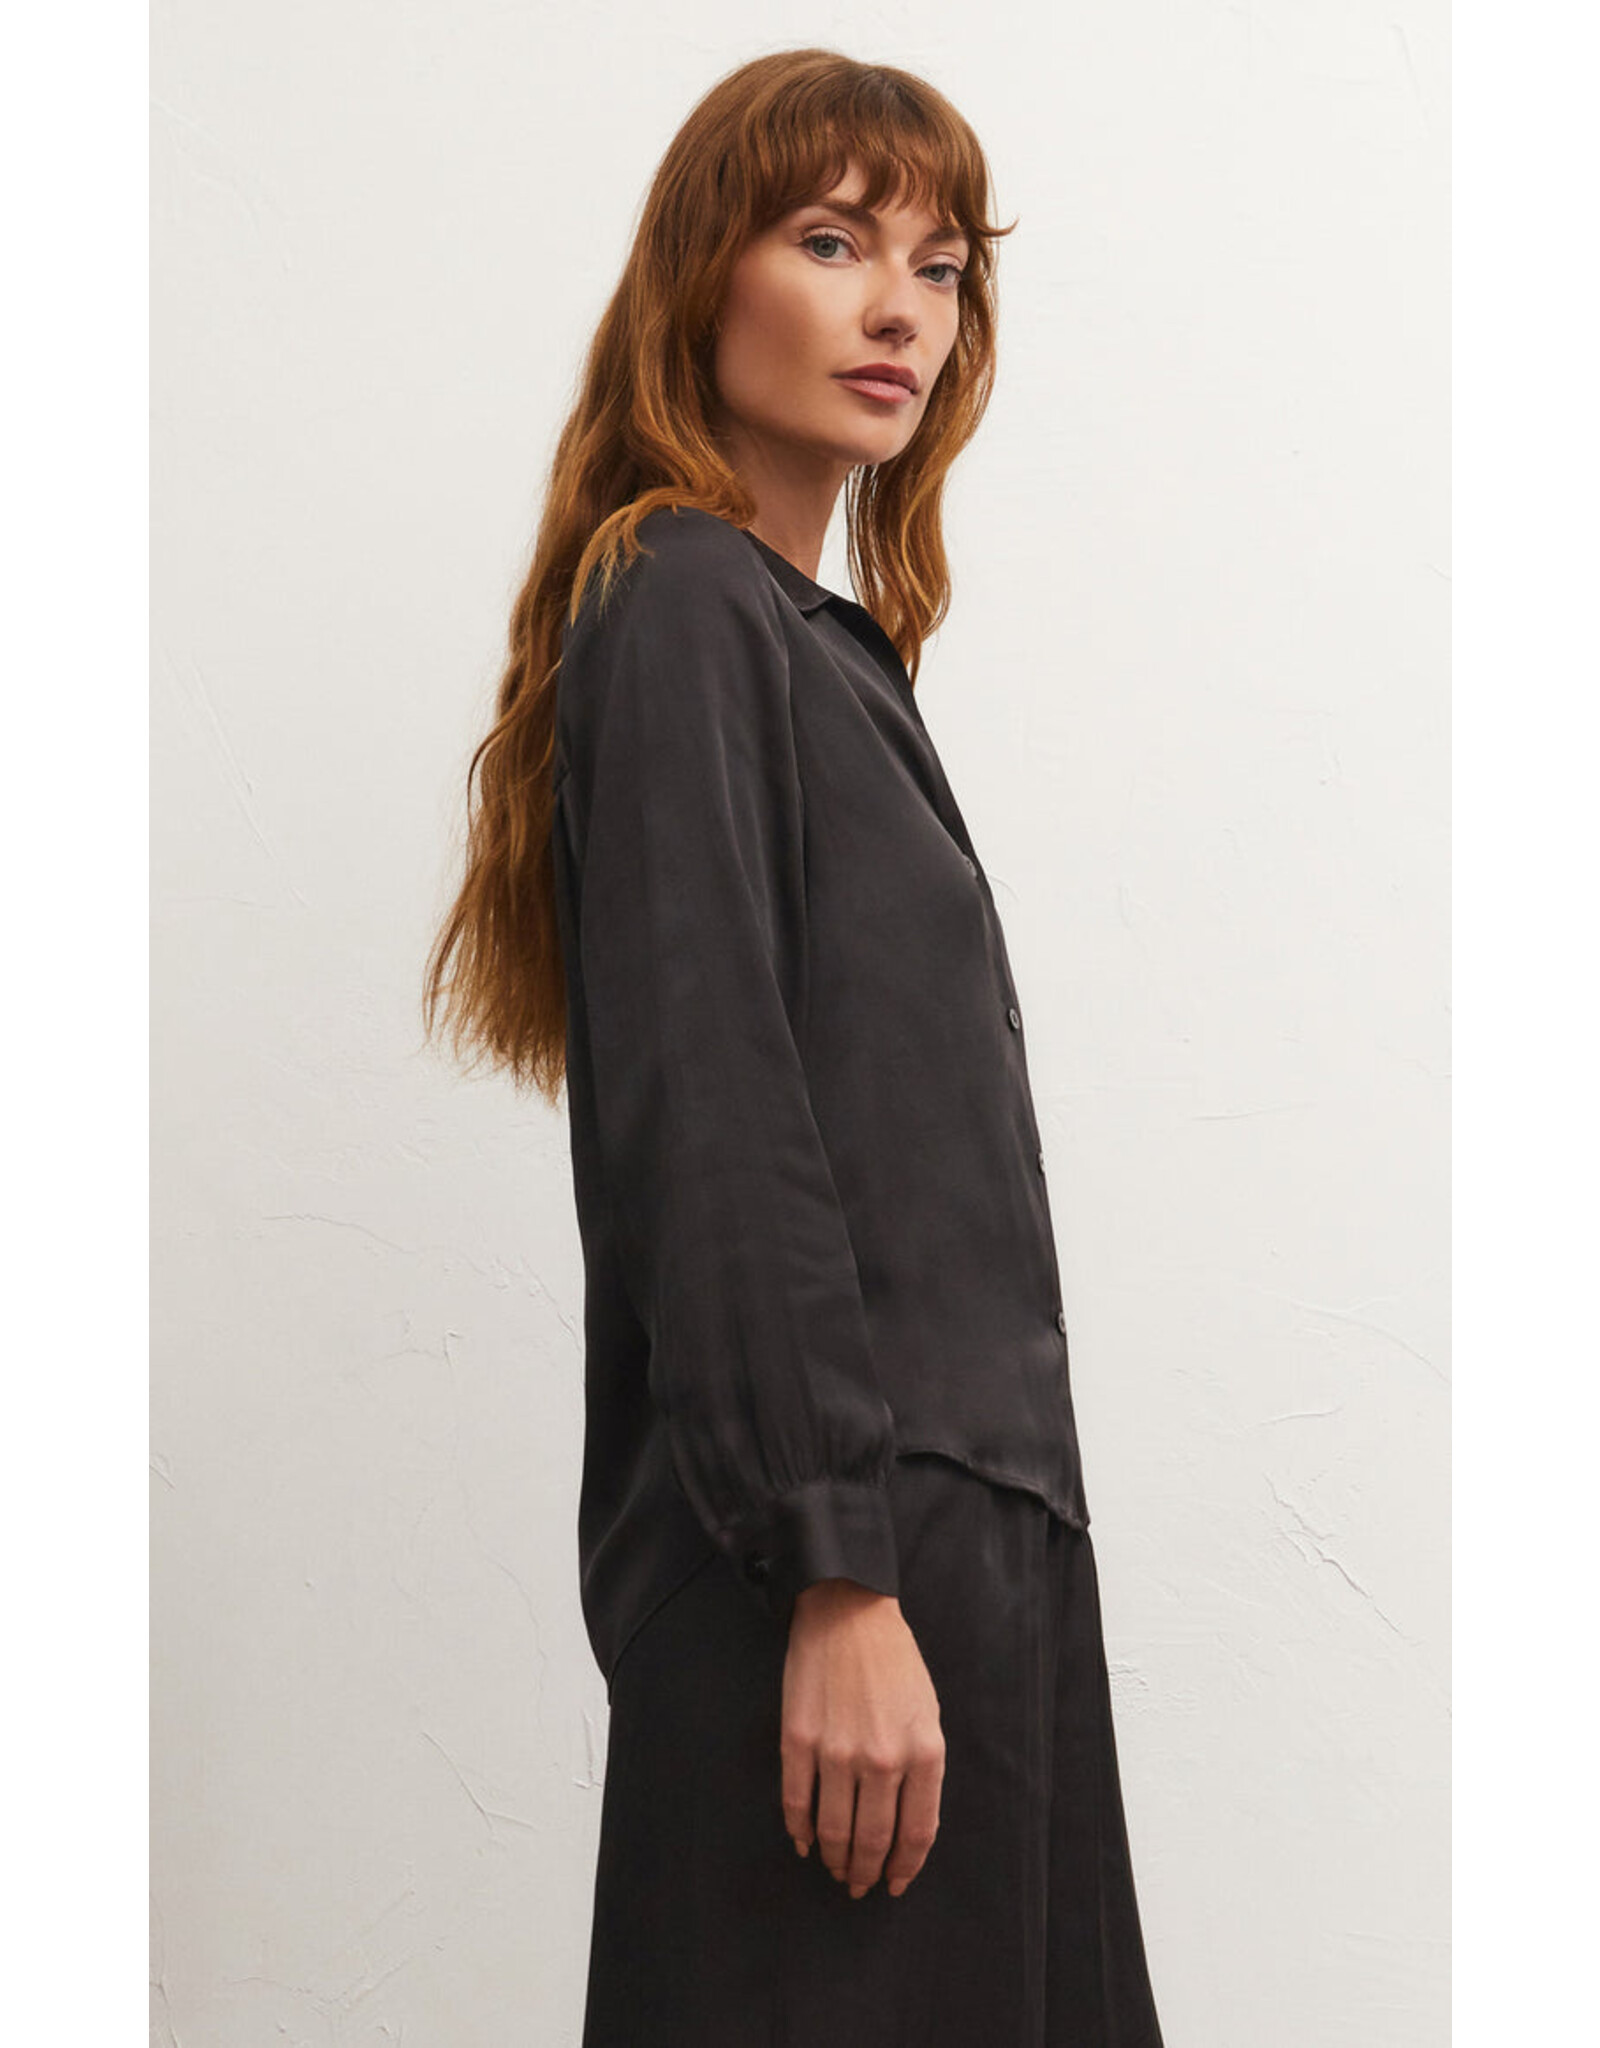 Z Supply - Serenity Lux Top